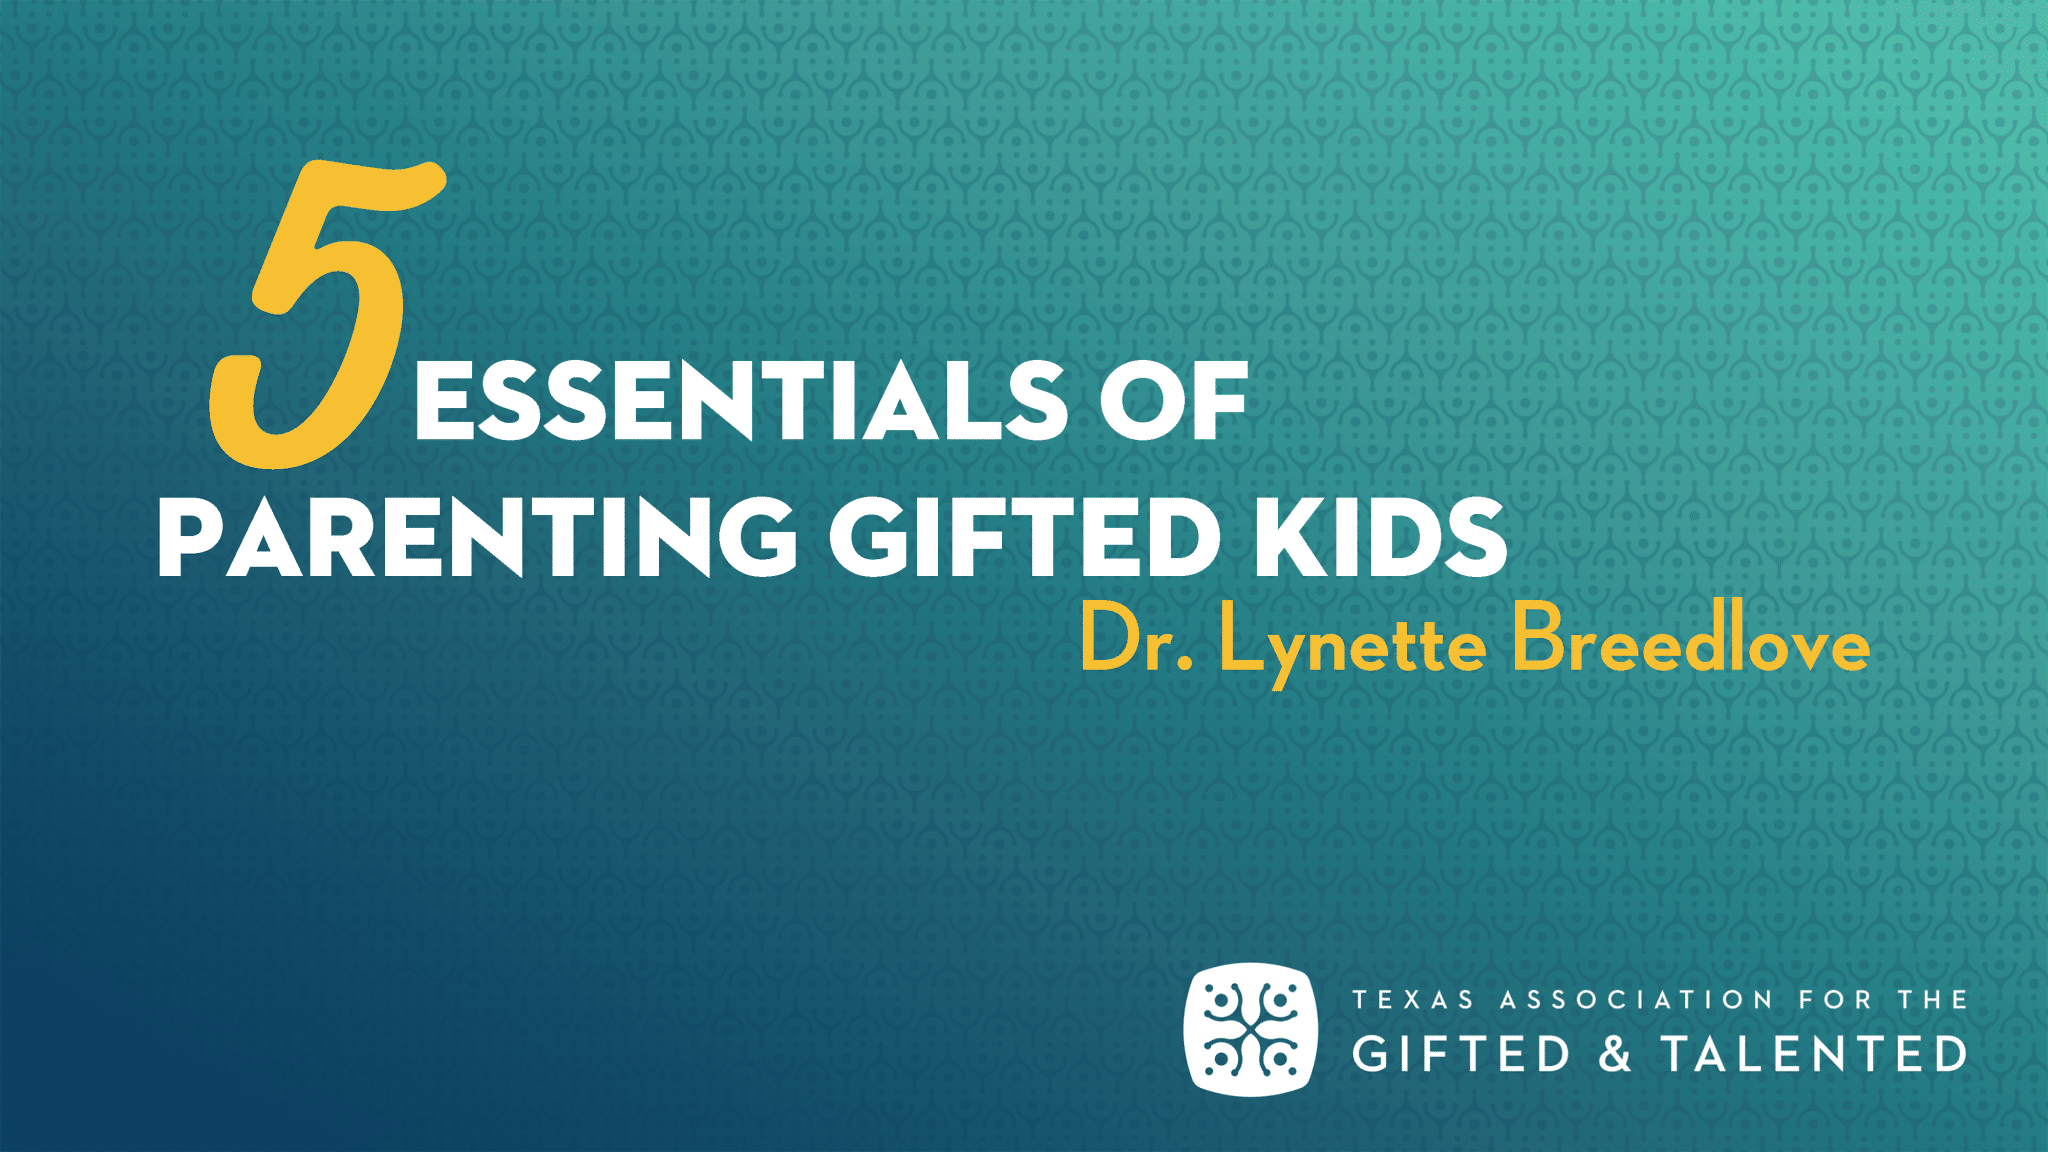 5 Essentials of Parenting Gifted Kids - TEMPO+